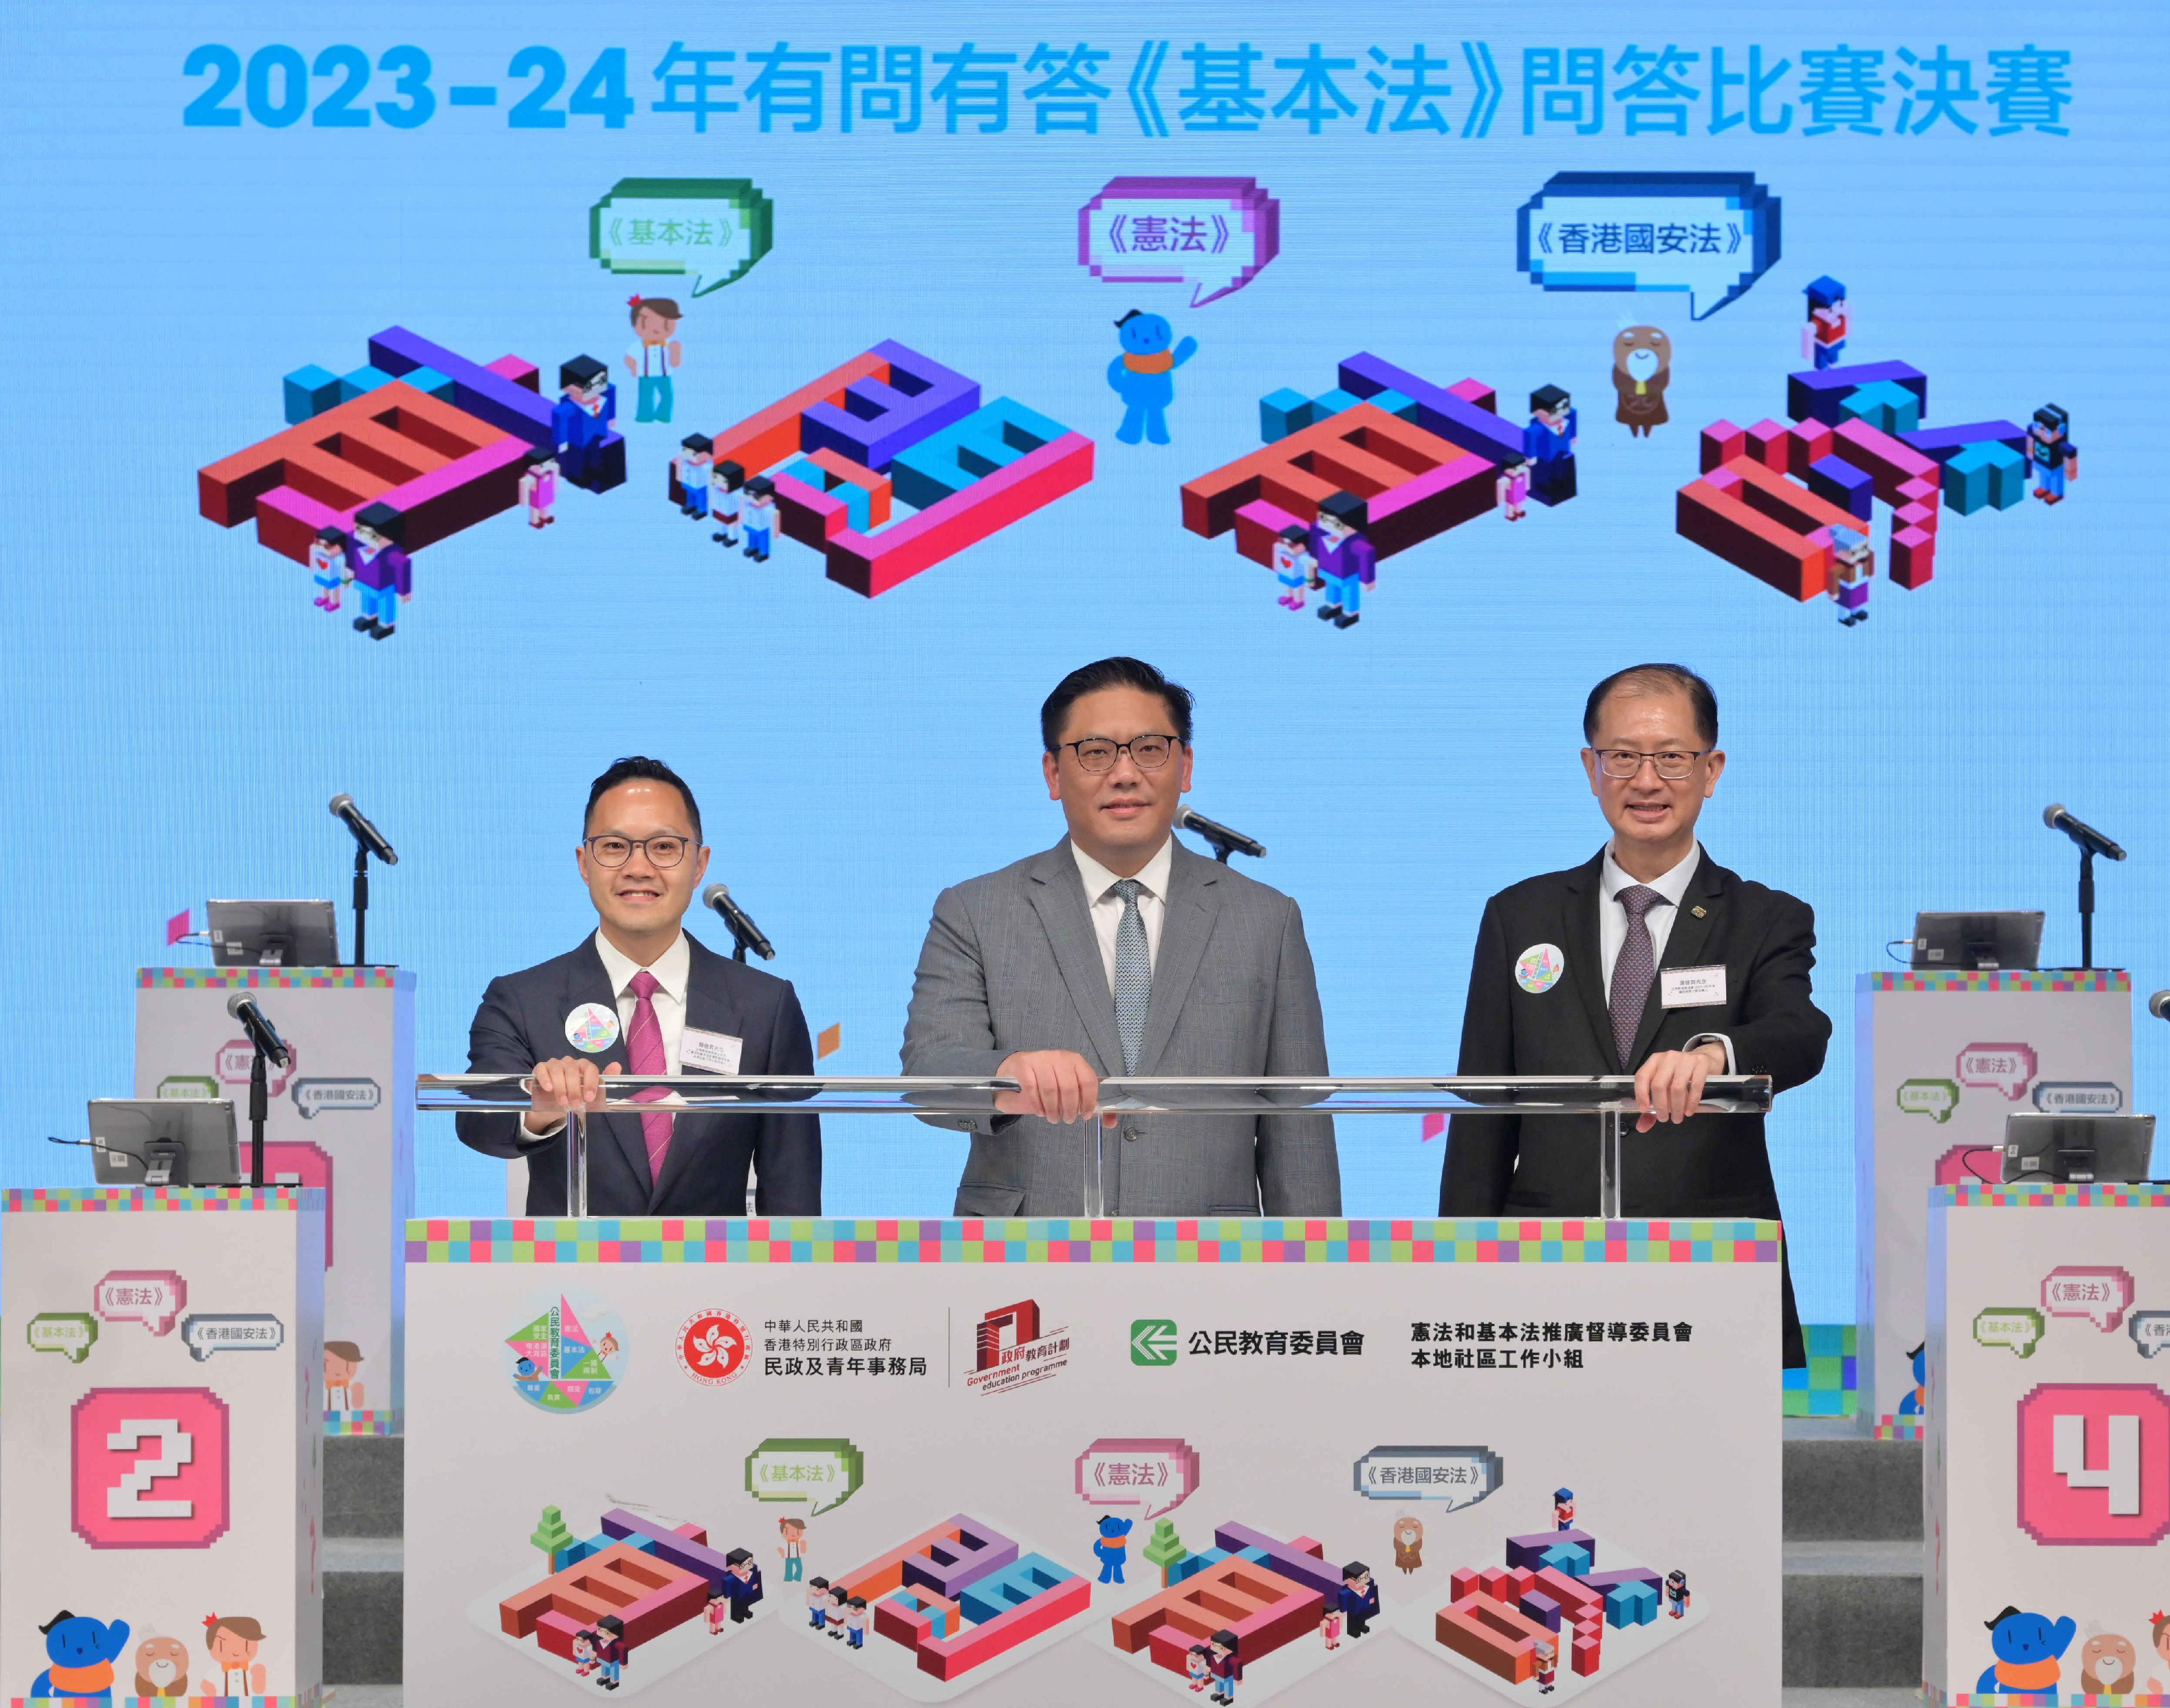 The Acting Secretary for Home and Youth Affairs, Mr Clarence Leung (centre); the Chairperson of the Committee on the Promotion of Civic Education (CPCE) and the Convenor of the Working Group on Local Community under the Constitution and Basic Law Promotion Steering Committee, Mr Stanley Choi (left); and the Convenor of the 2023-24 National Education Sub-committee of the CPCE, Mr Henry Tong (right), officiate at the Basic Law Quiz Competition Final and Prize Presentation Ceremony today (April 21).